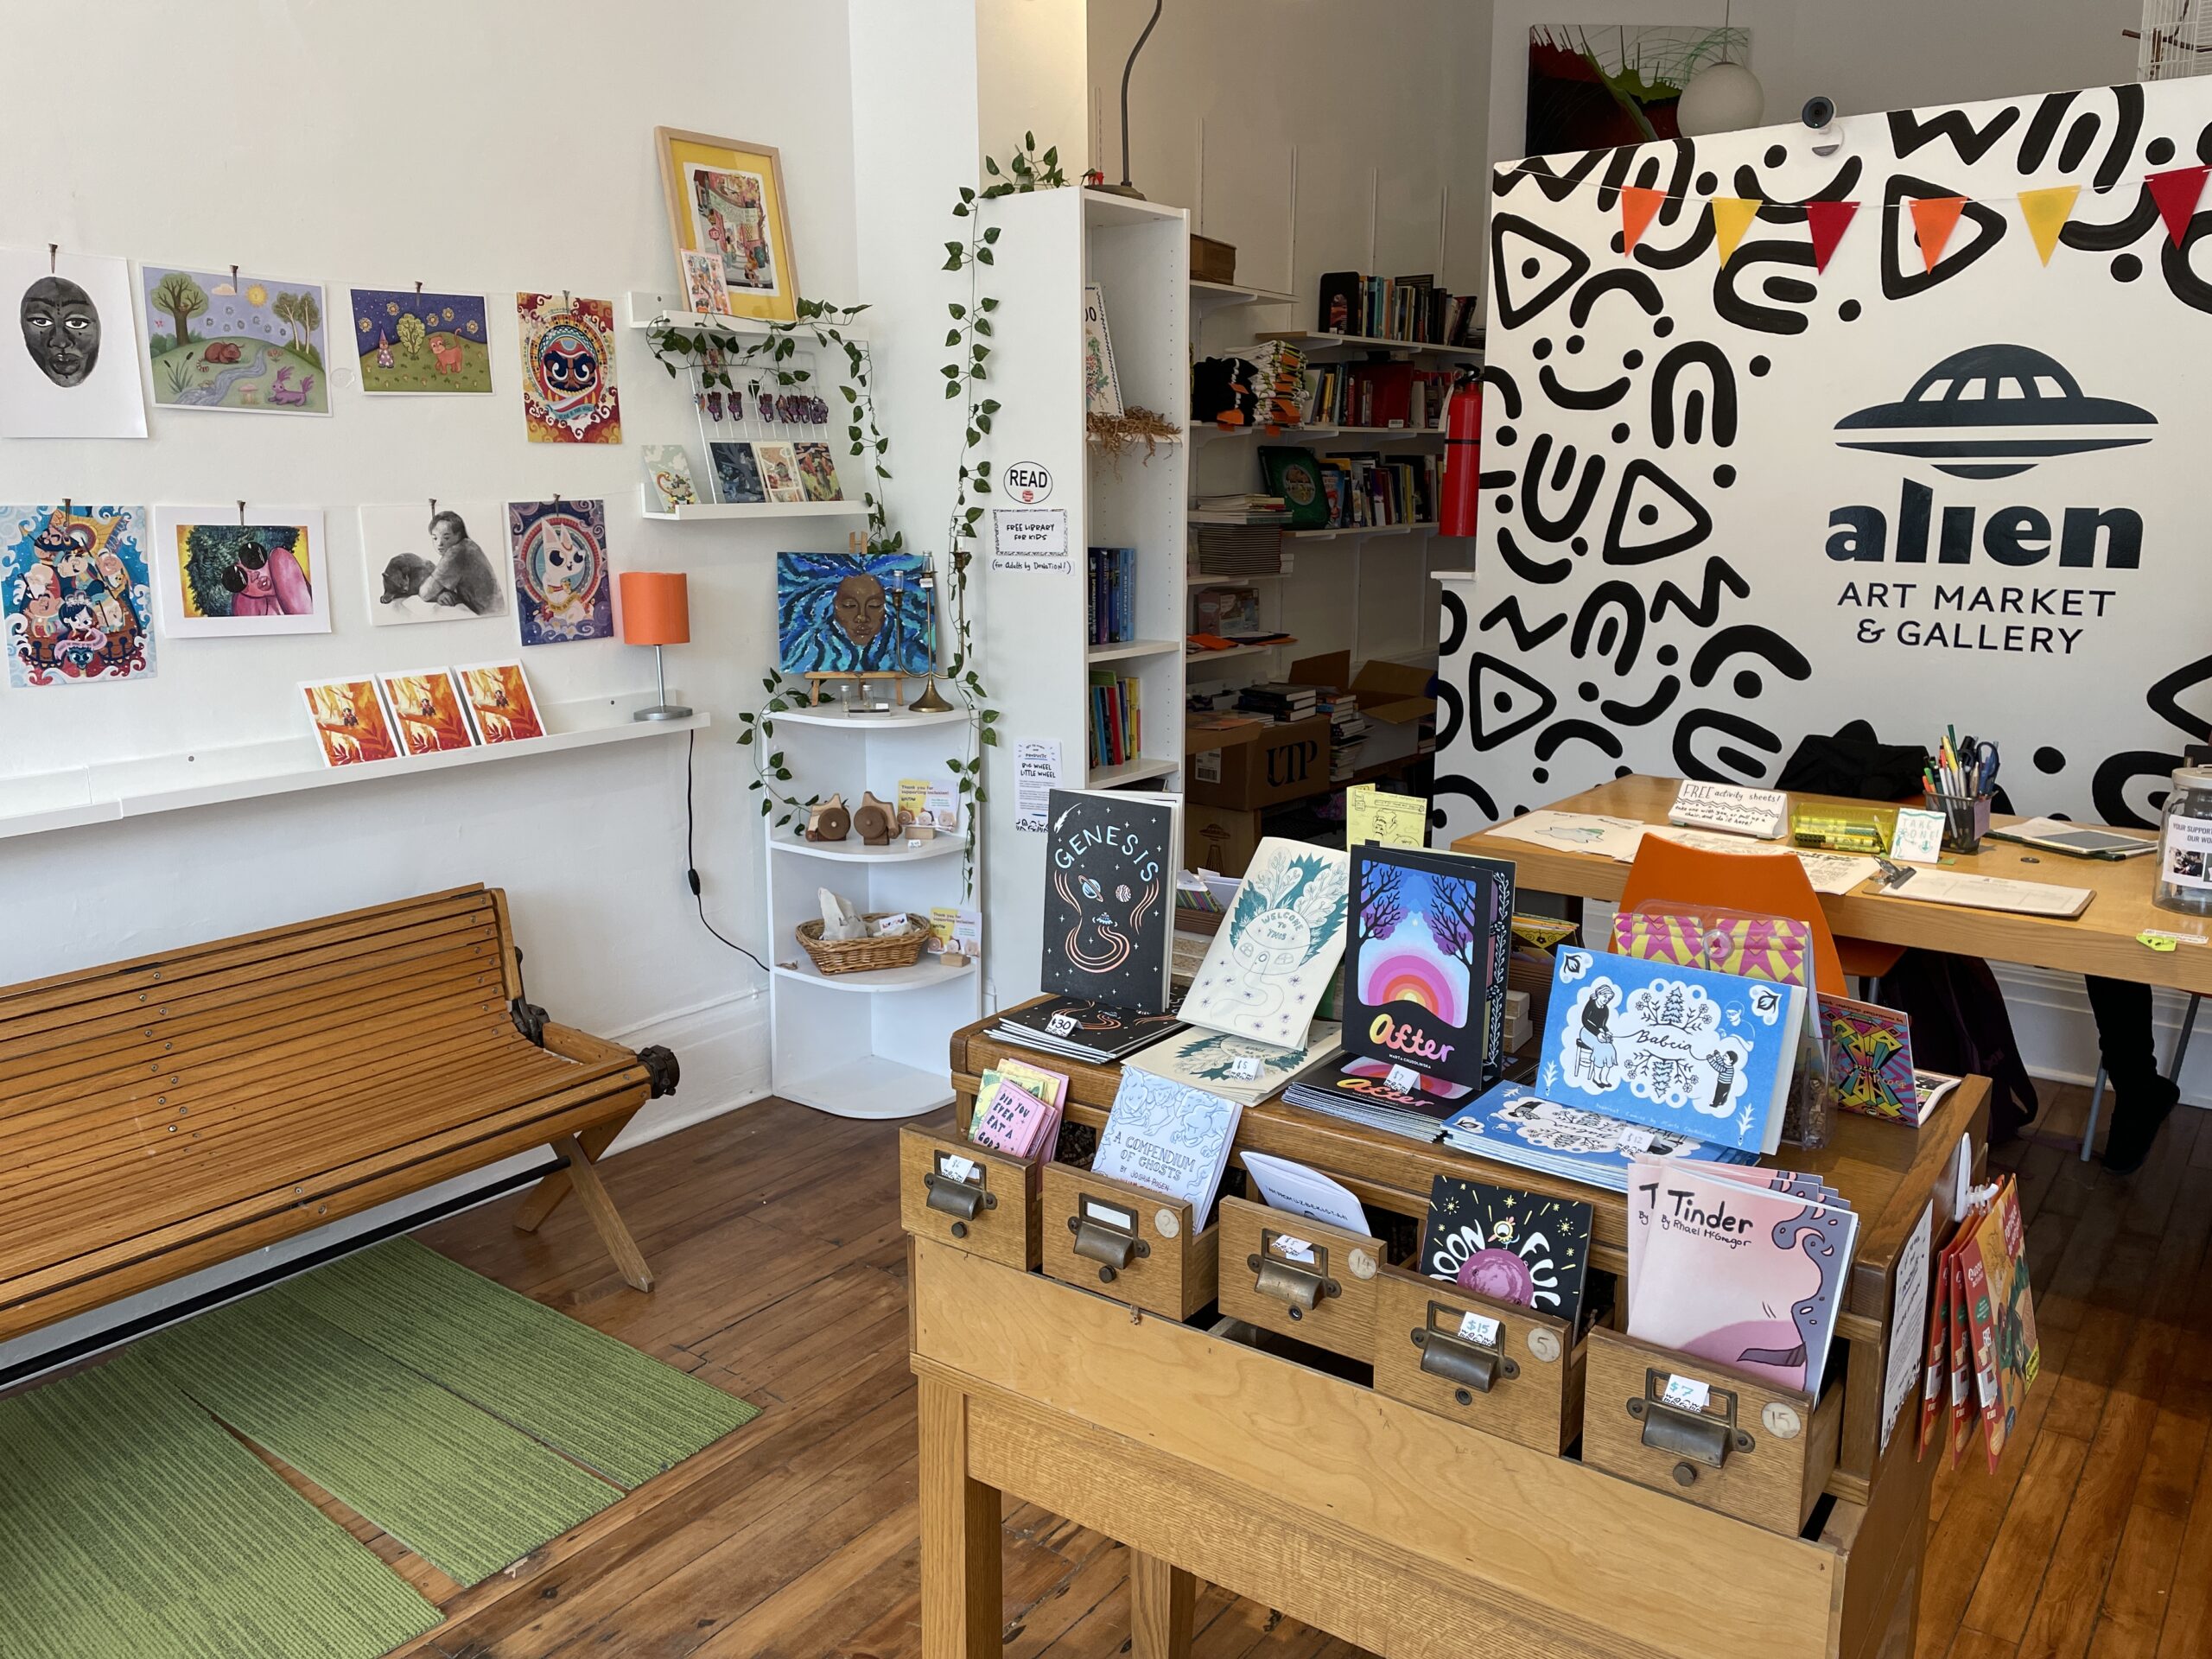 A photograph of Alien Art Market, featuring books and artwork on display on shelves.